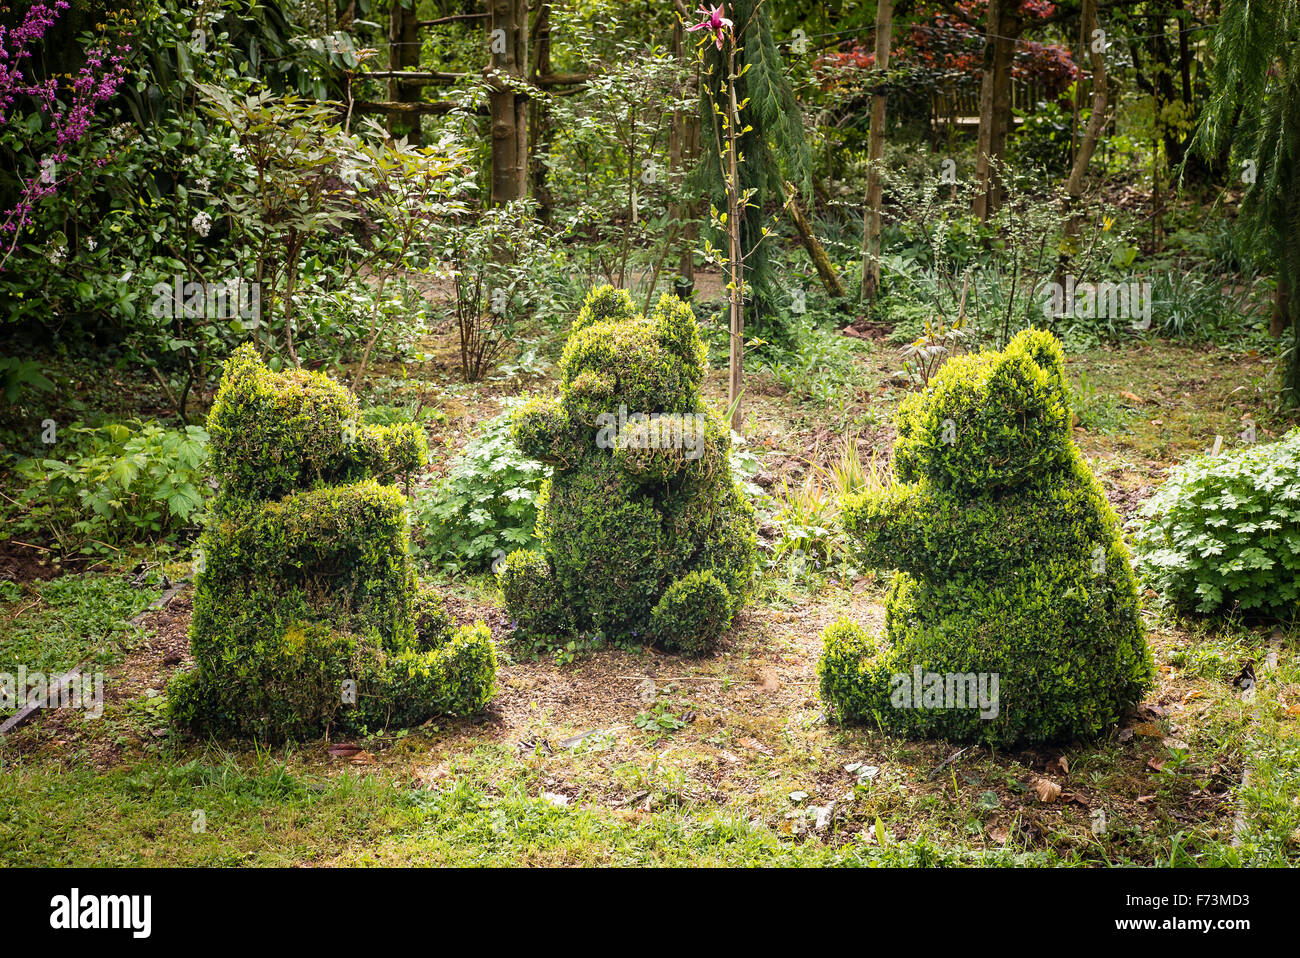 Topiary depicting the Three Little Bears in a private woodland garden in UK Stock Photo